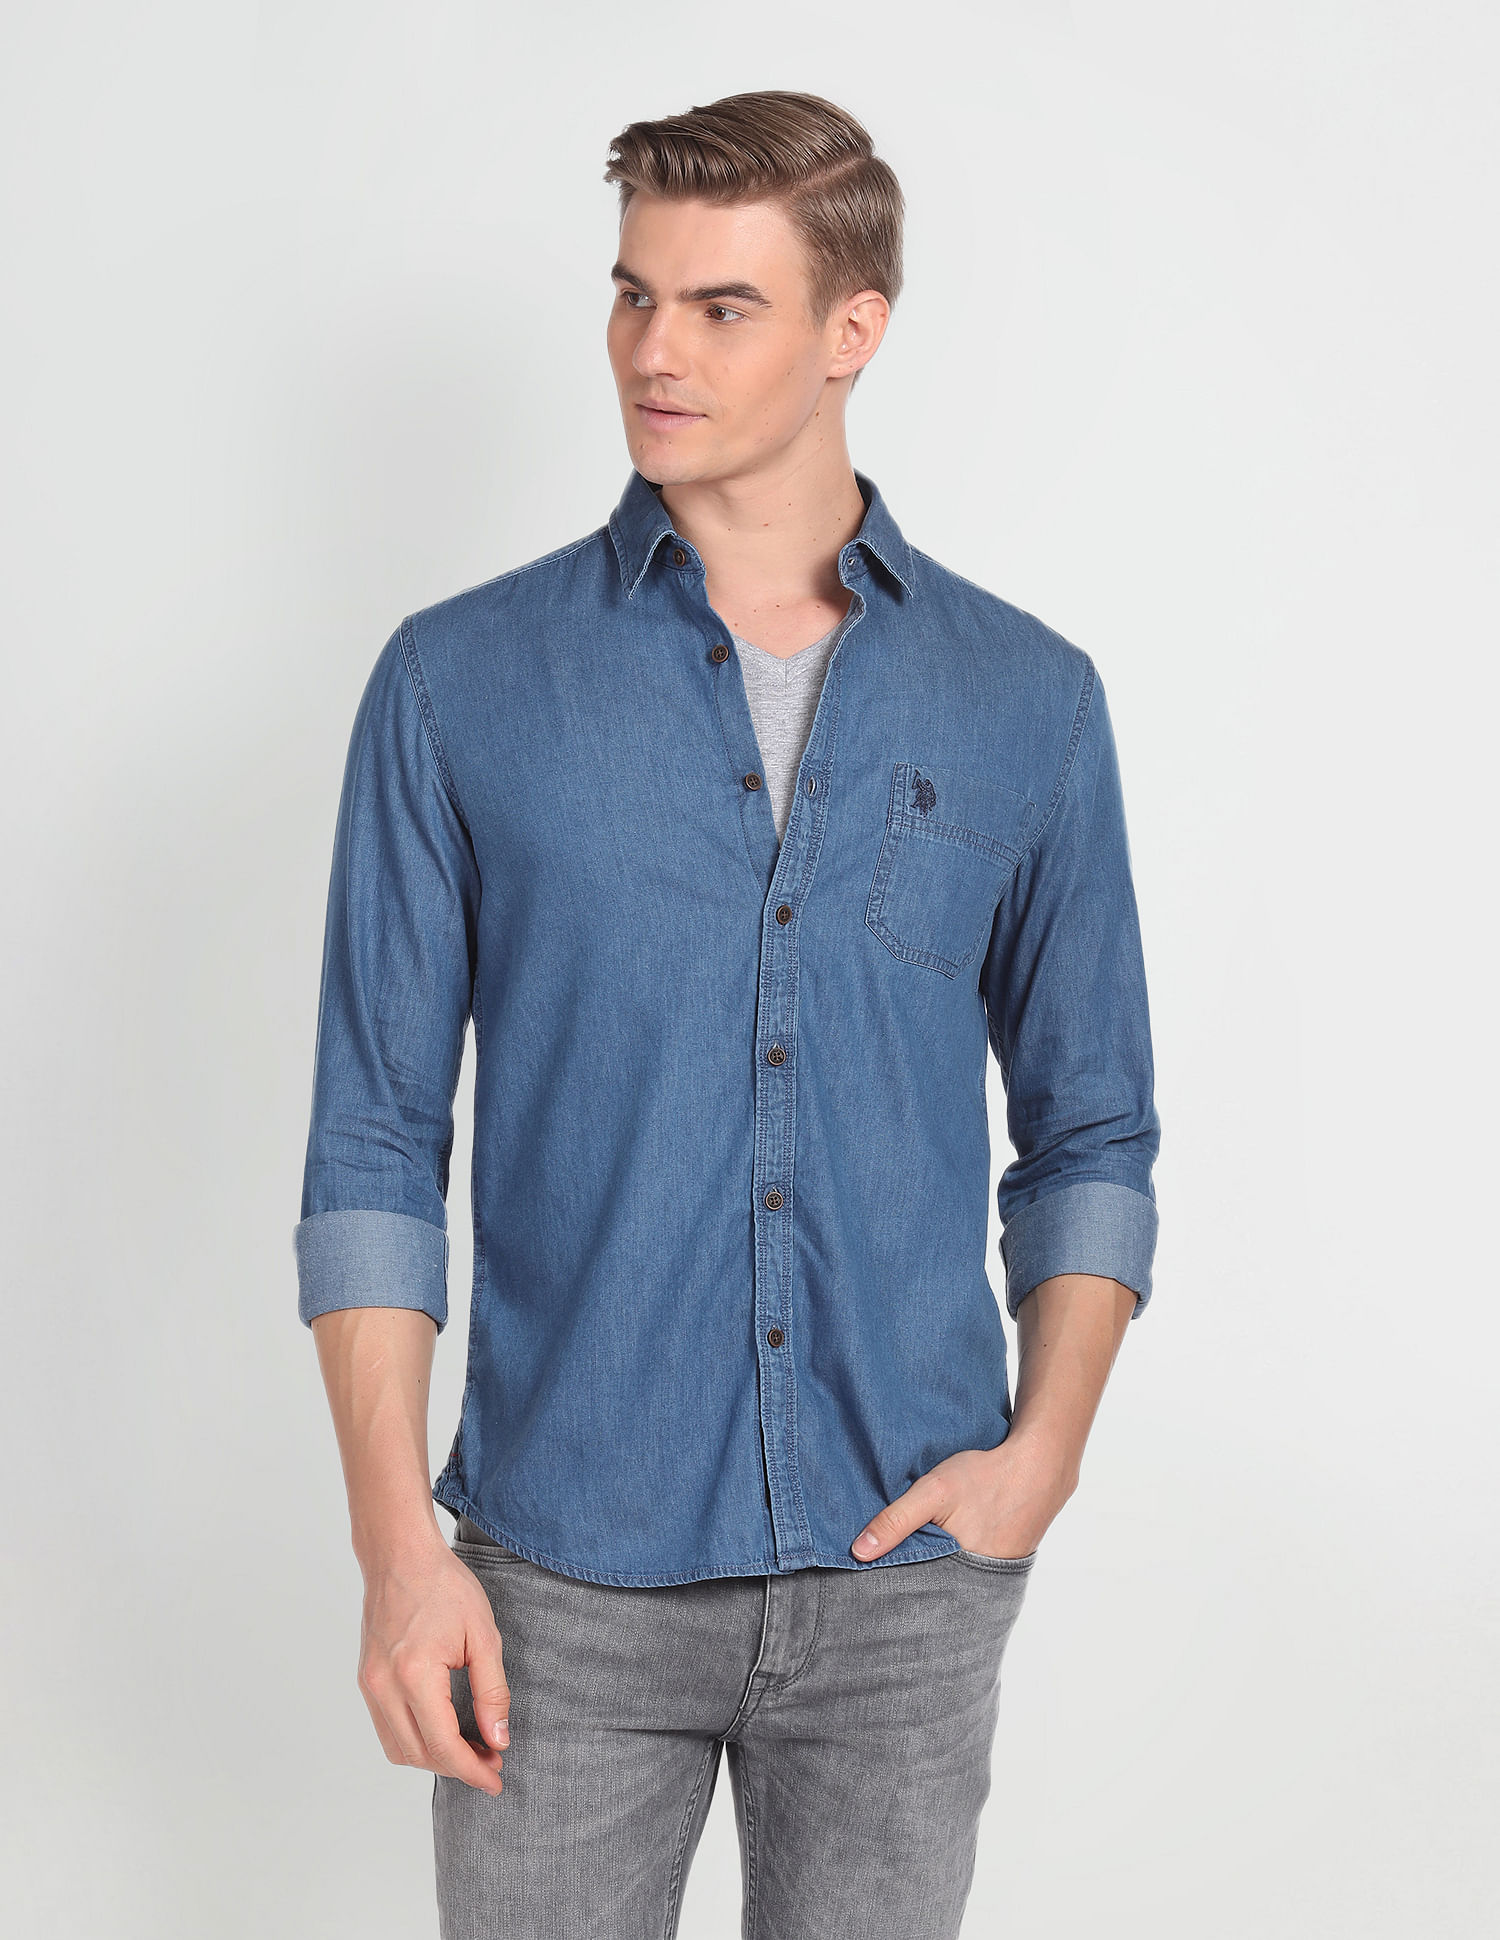 Softest Chambray Shirts For Fall - VSTYLE